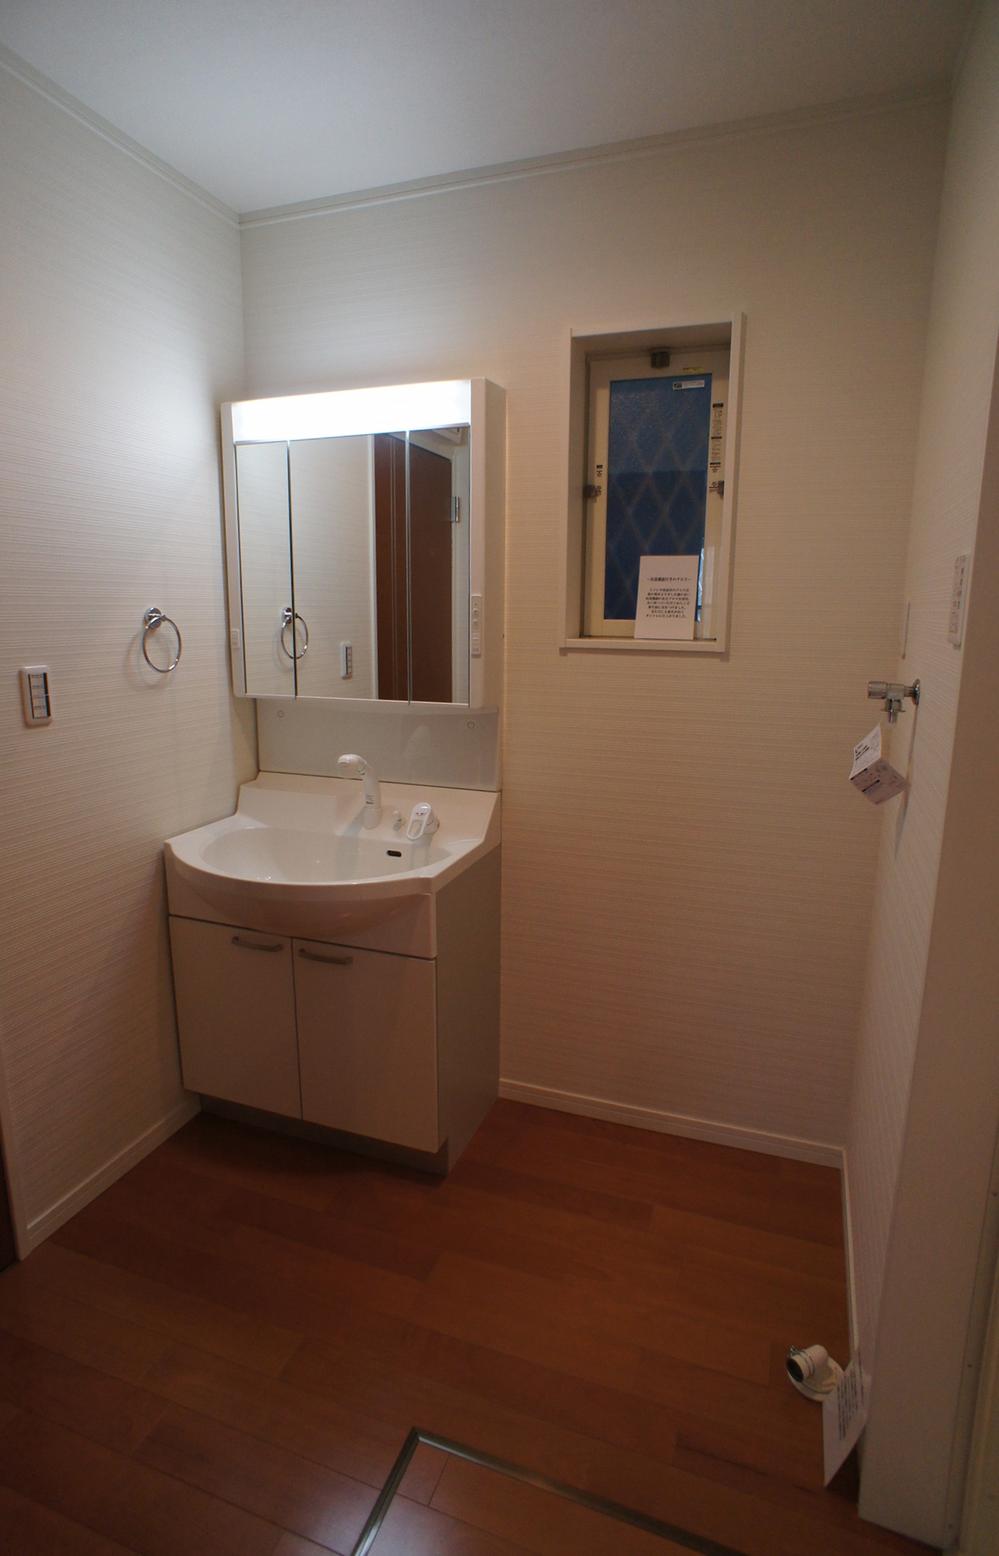 Wash basin, toilet. Basin dressing room and spacious, There is also under-floor storage